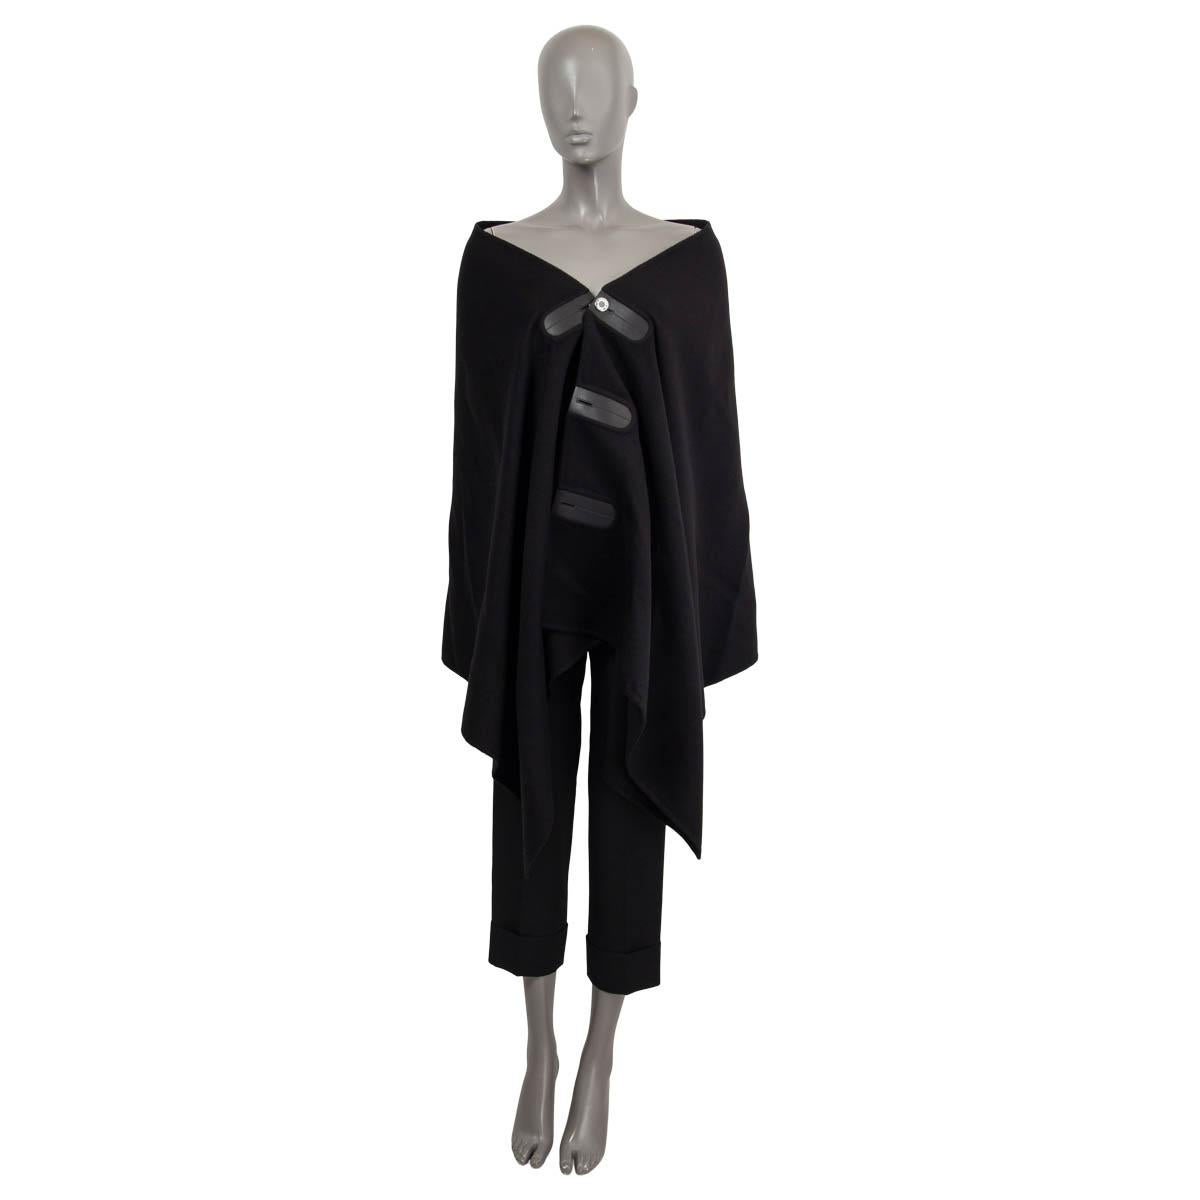 100% authentic Hermès cape in black cashmere (100%) with black leather trims. Opens with one variable silver-tone 'Hermès' button on the front. Unlined. Has been worn once and is in virtually new condition.

Measurements
Tag Size	One Size
Size	one